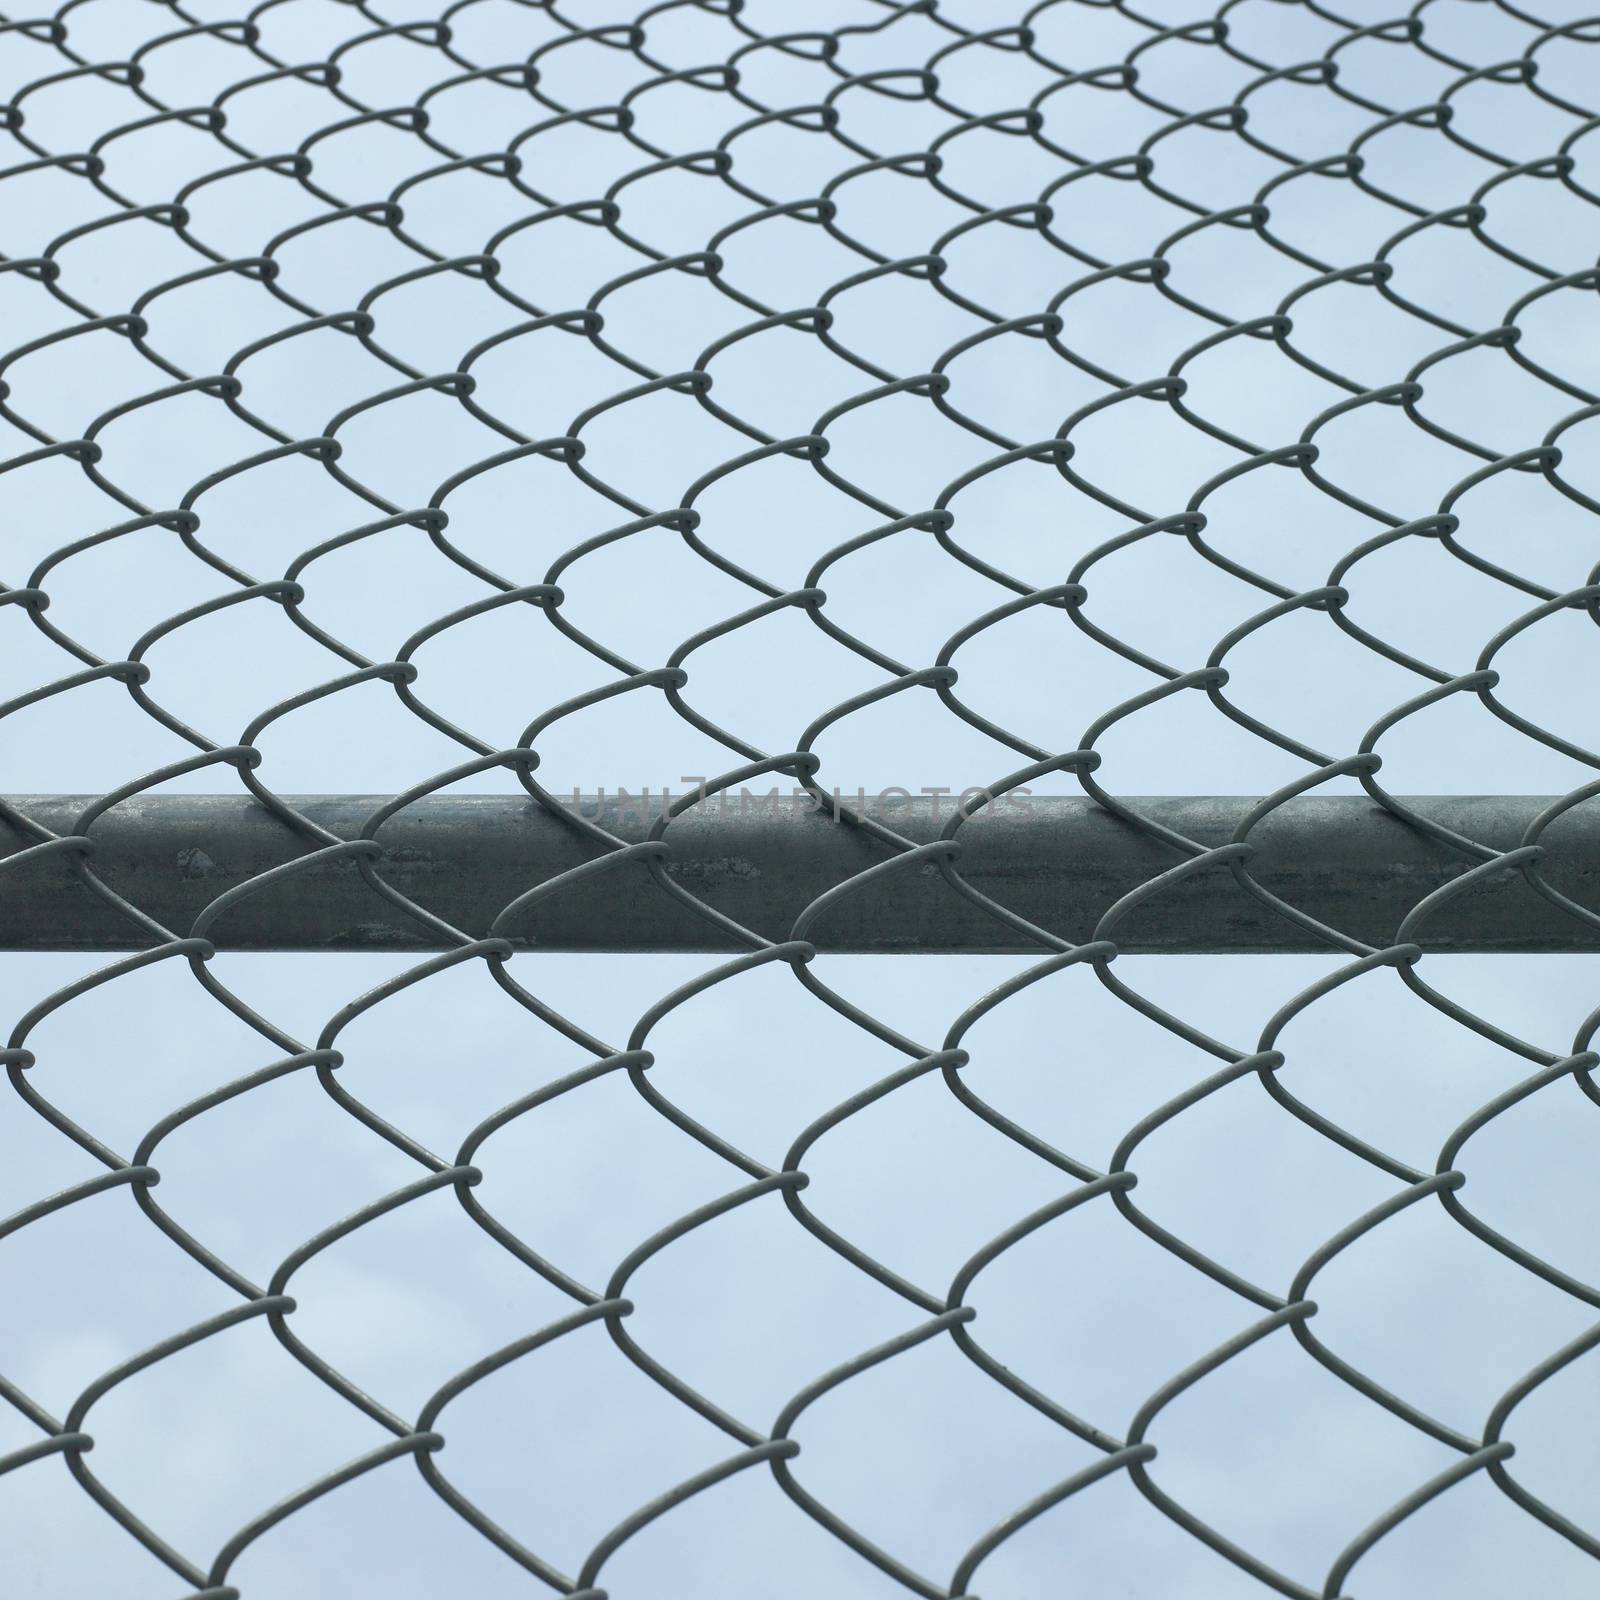 Chain Link Fence by mmm